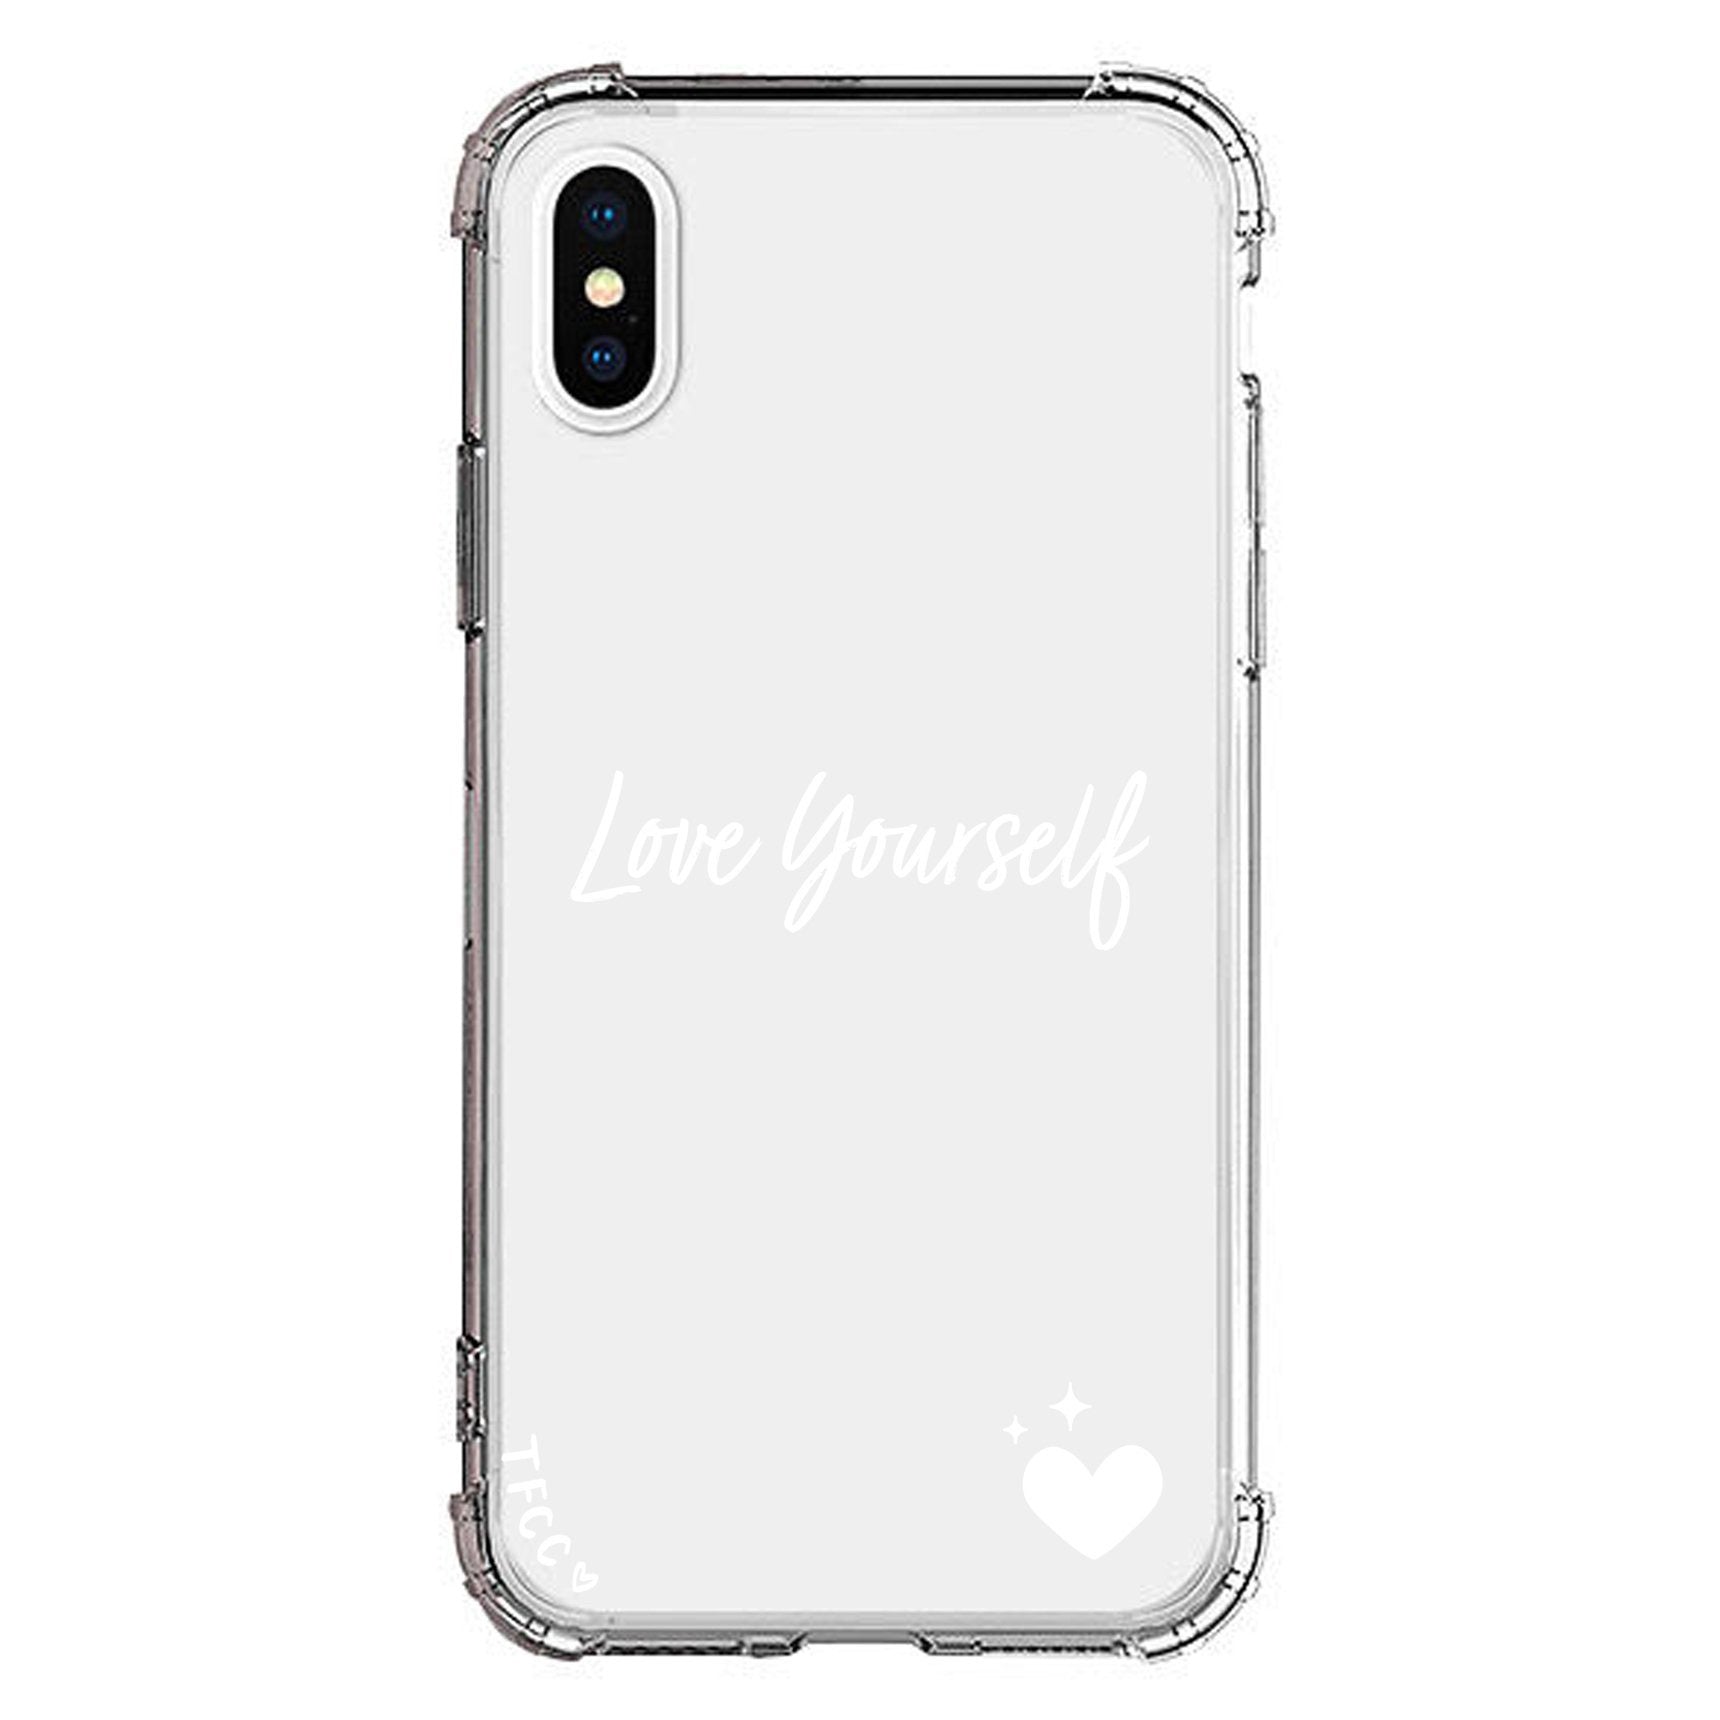 LOVE YOURSELF CLEAR CASE - thefonecasecompany